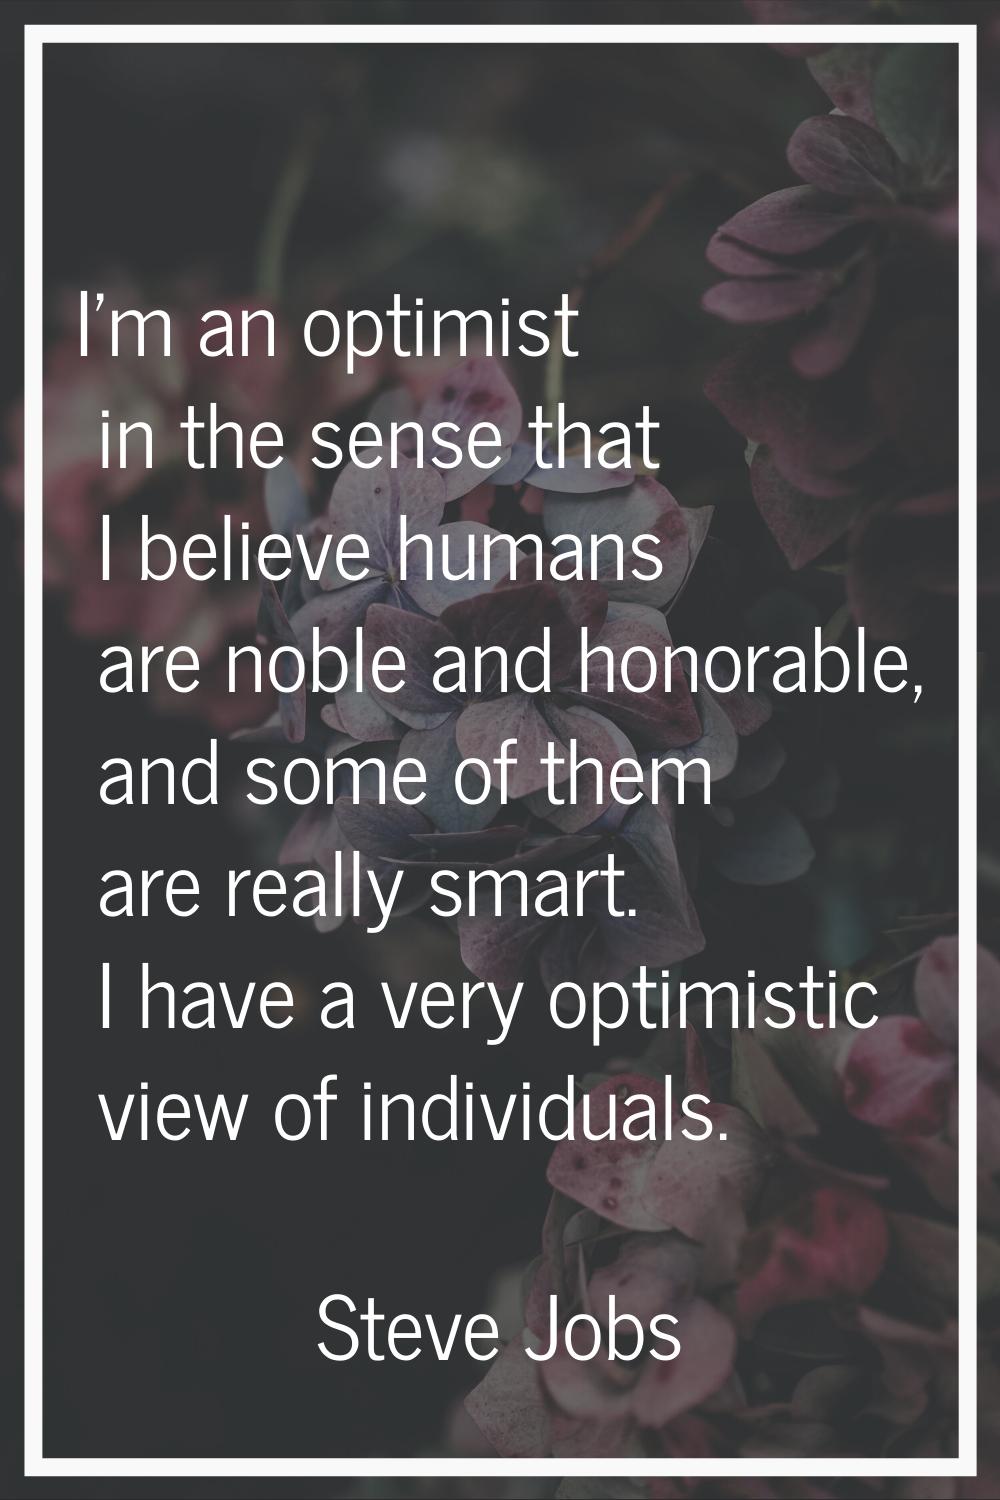 I'm an optimist in the sense that I believe humans are noble and honorable, and some of them are re